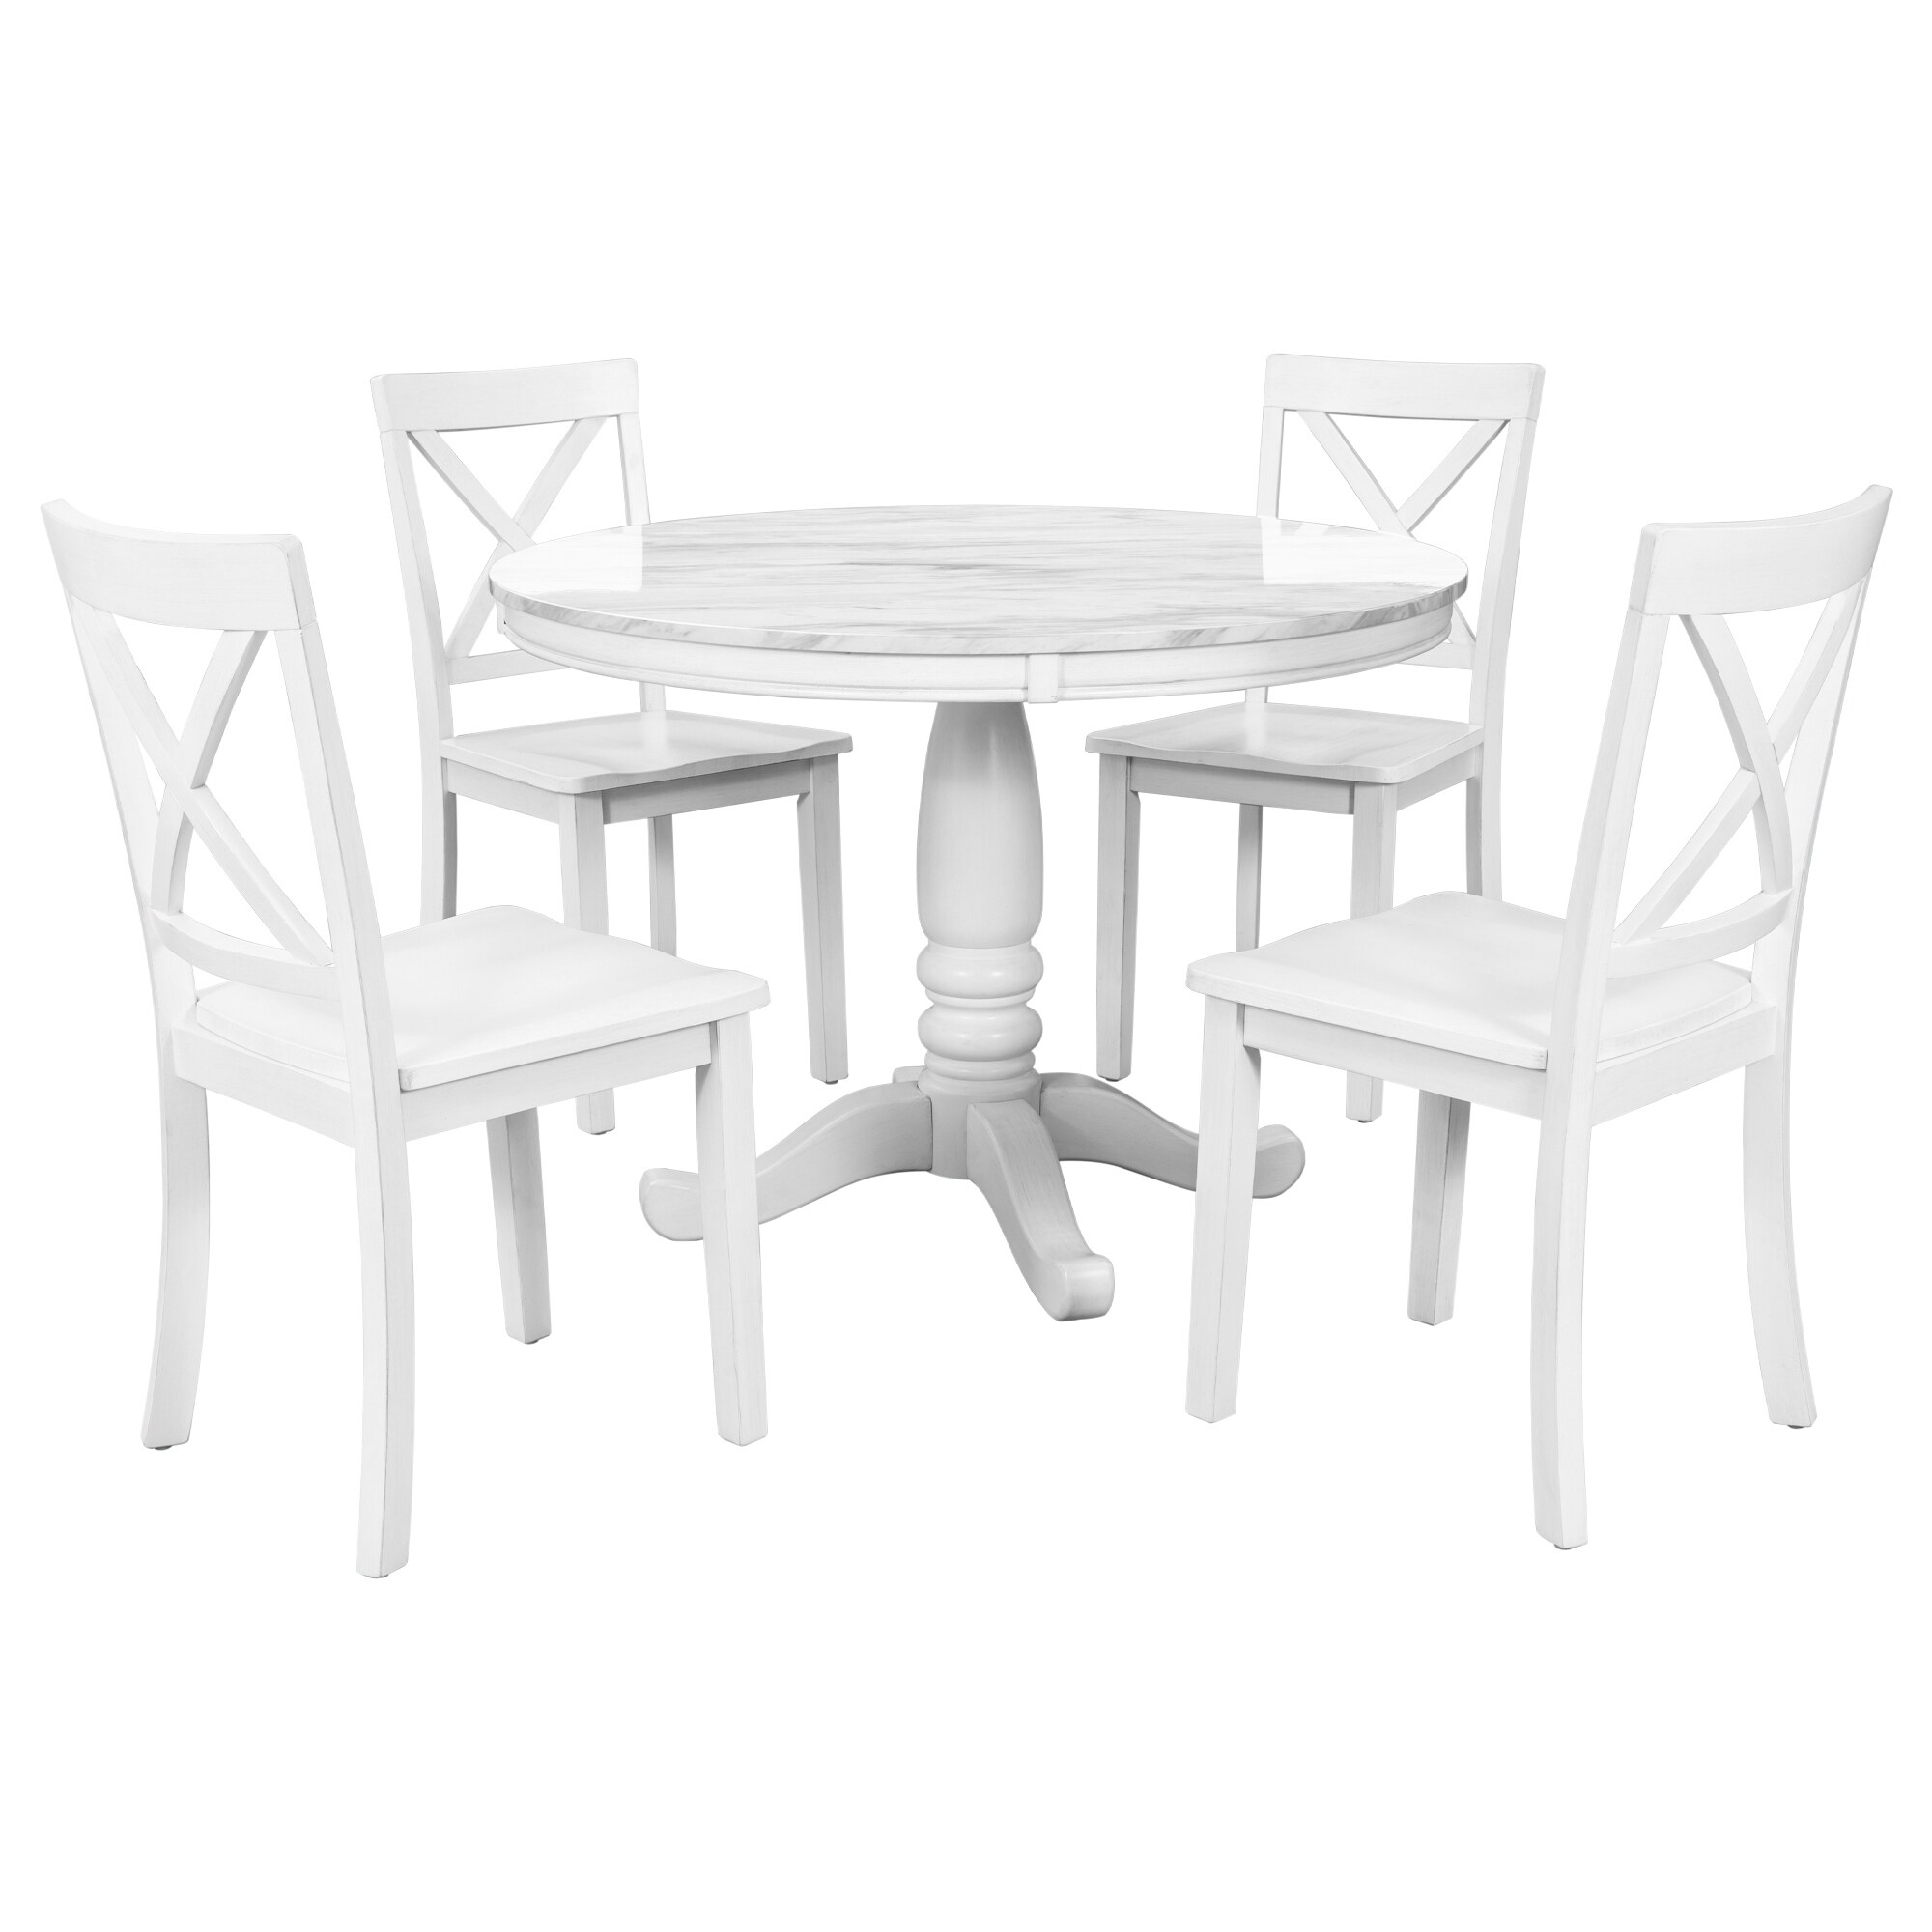 5-Piece Round Dining Table Set for 4 with Drop Leaf & 4 Padded Chairs